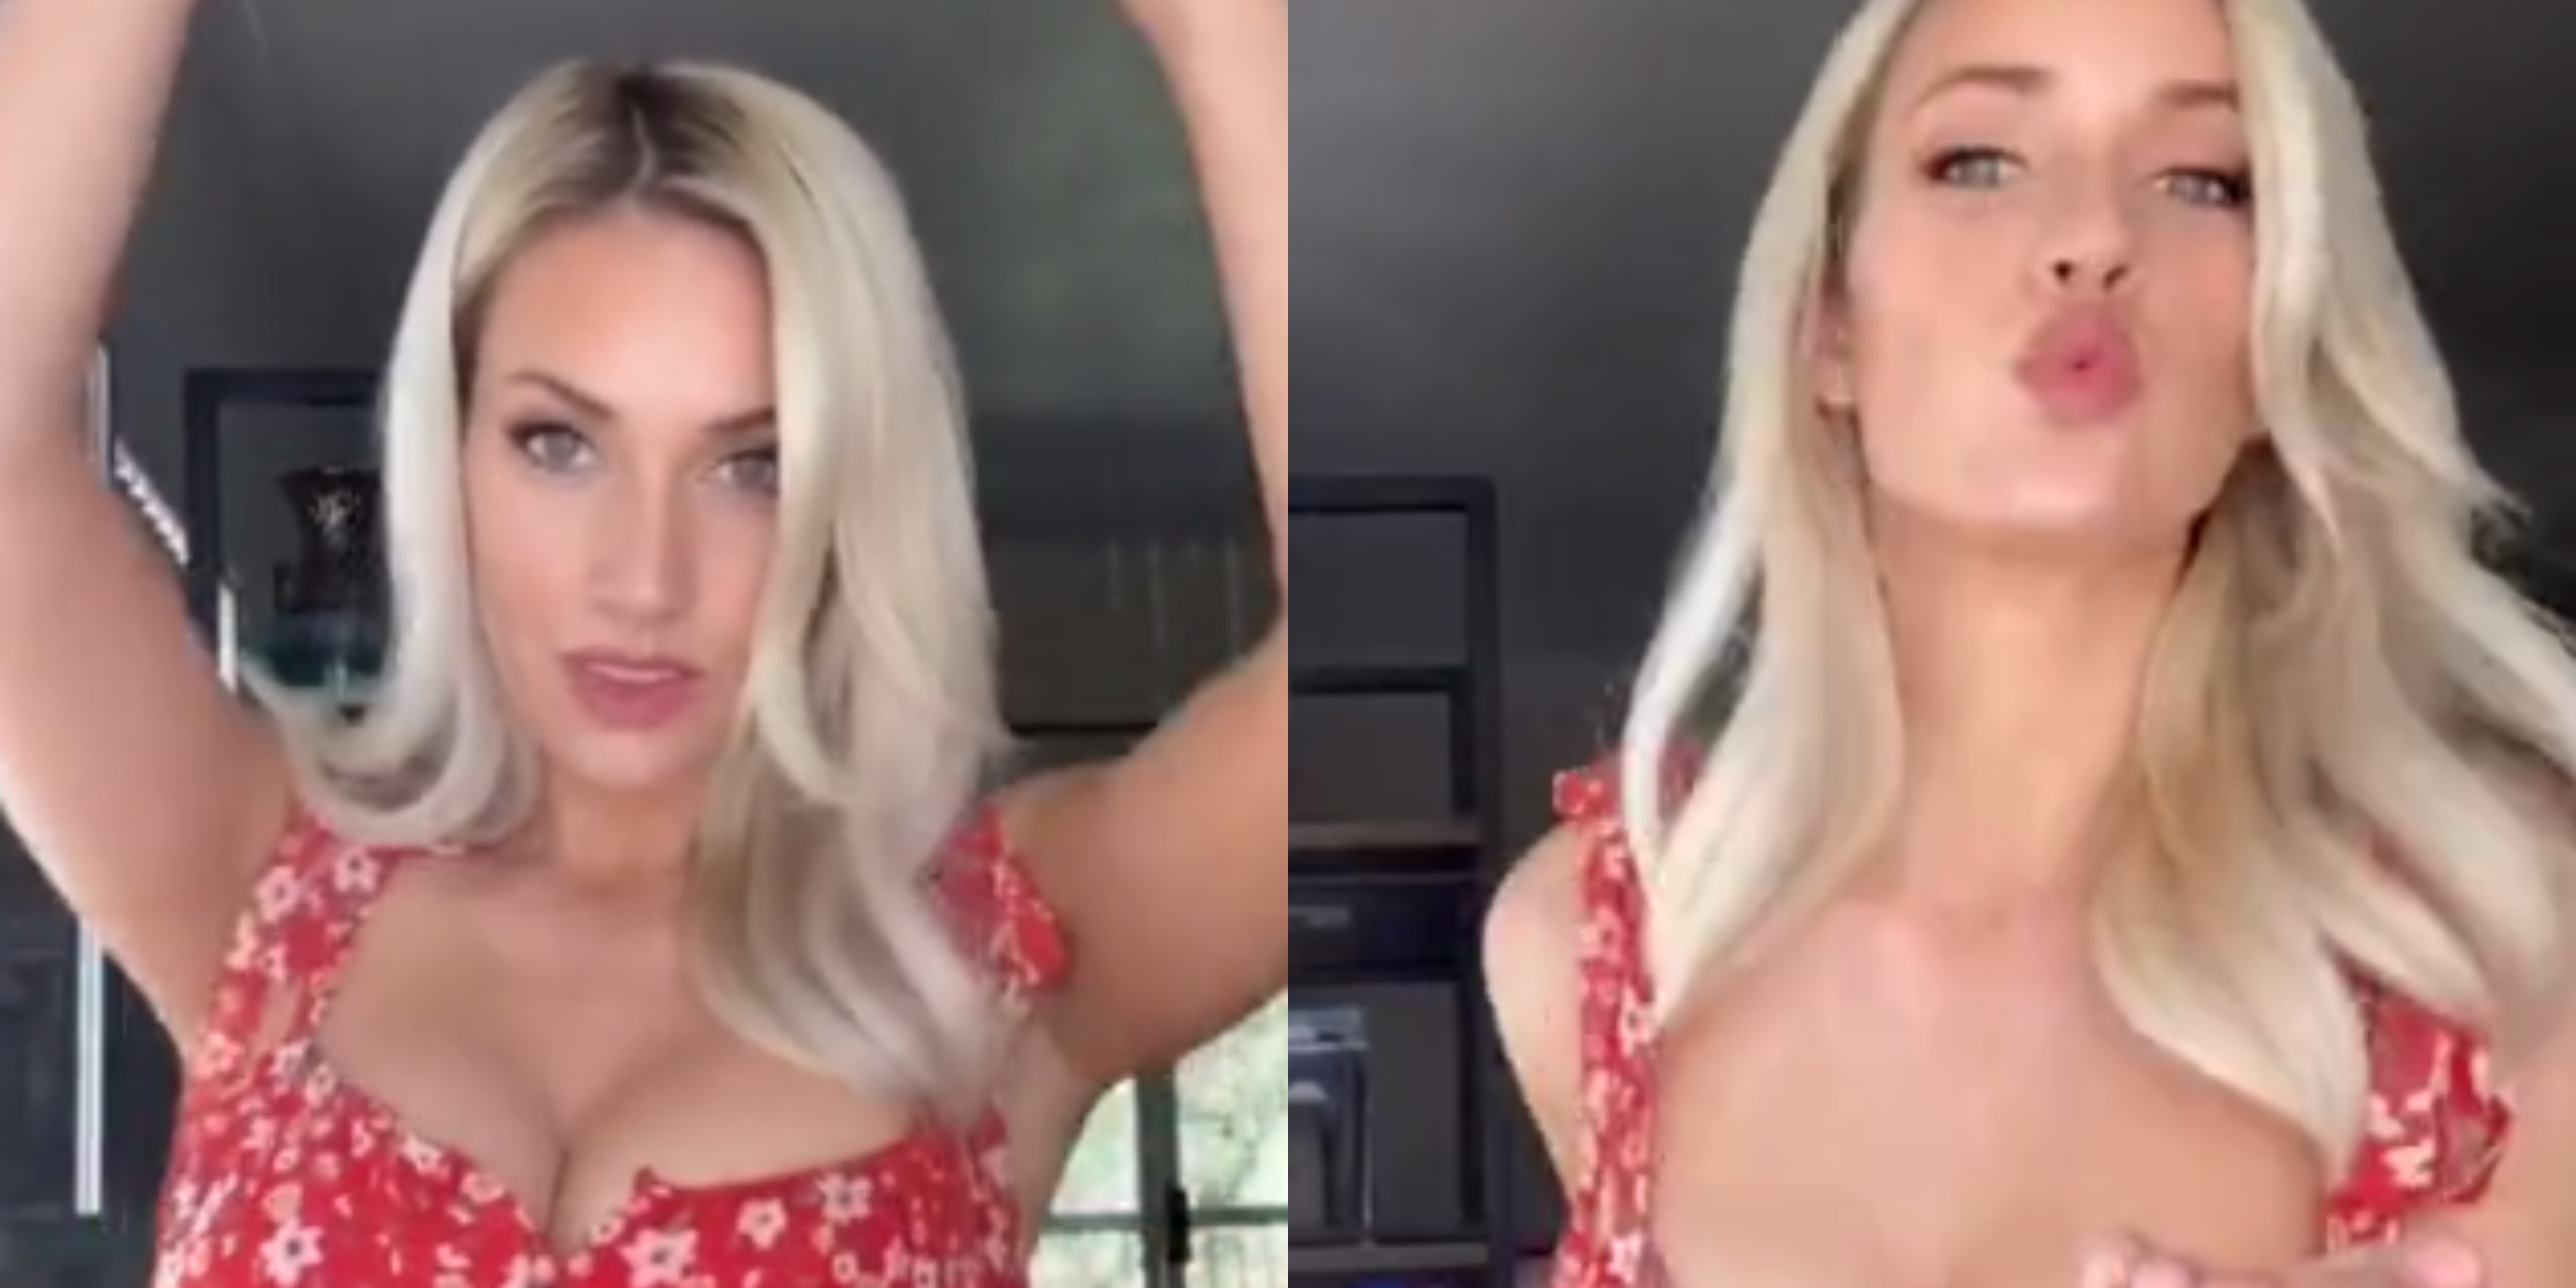 Pro Golfer Paige Spiranac Rocks Low Cut Dress To Show Off Boobs While